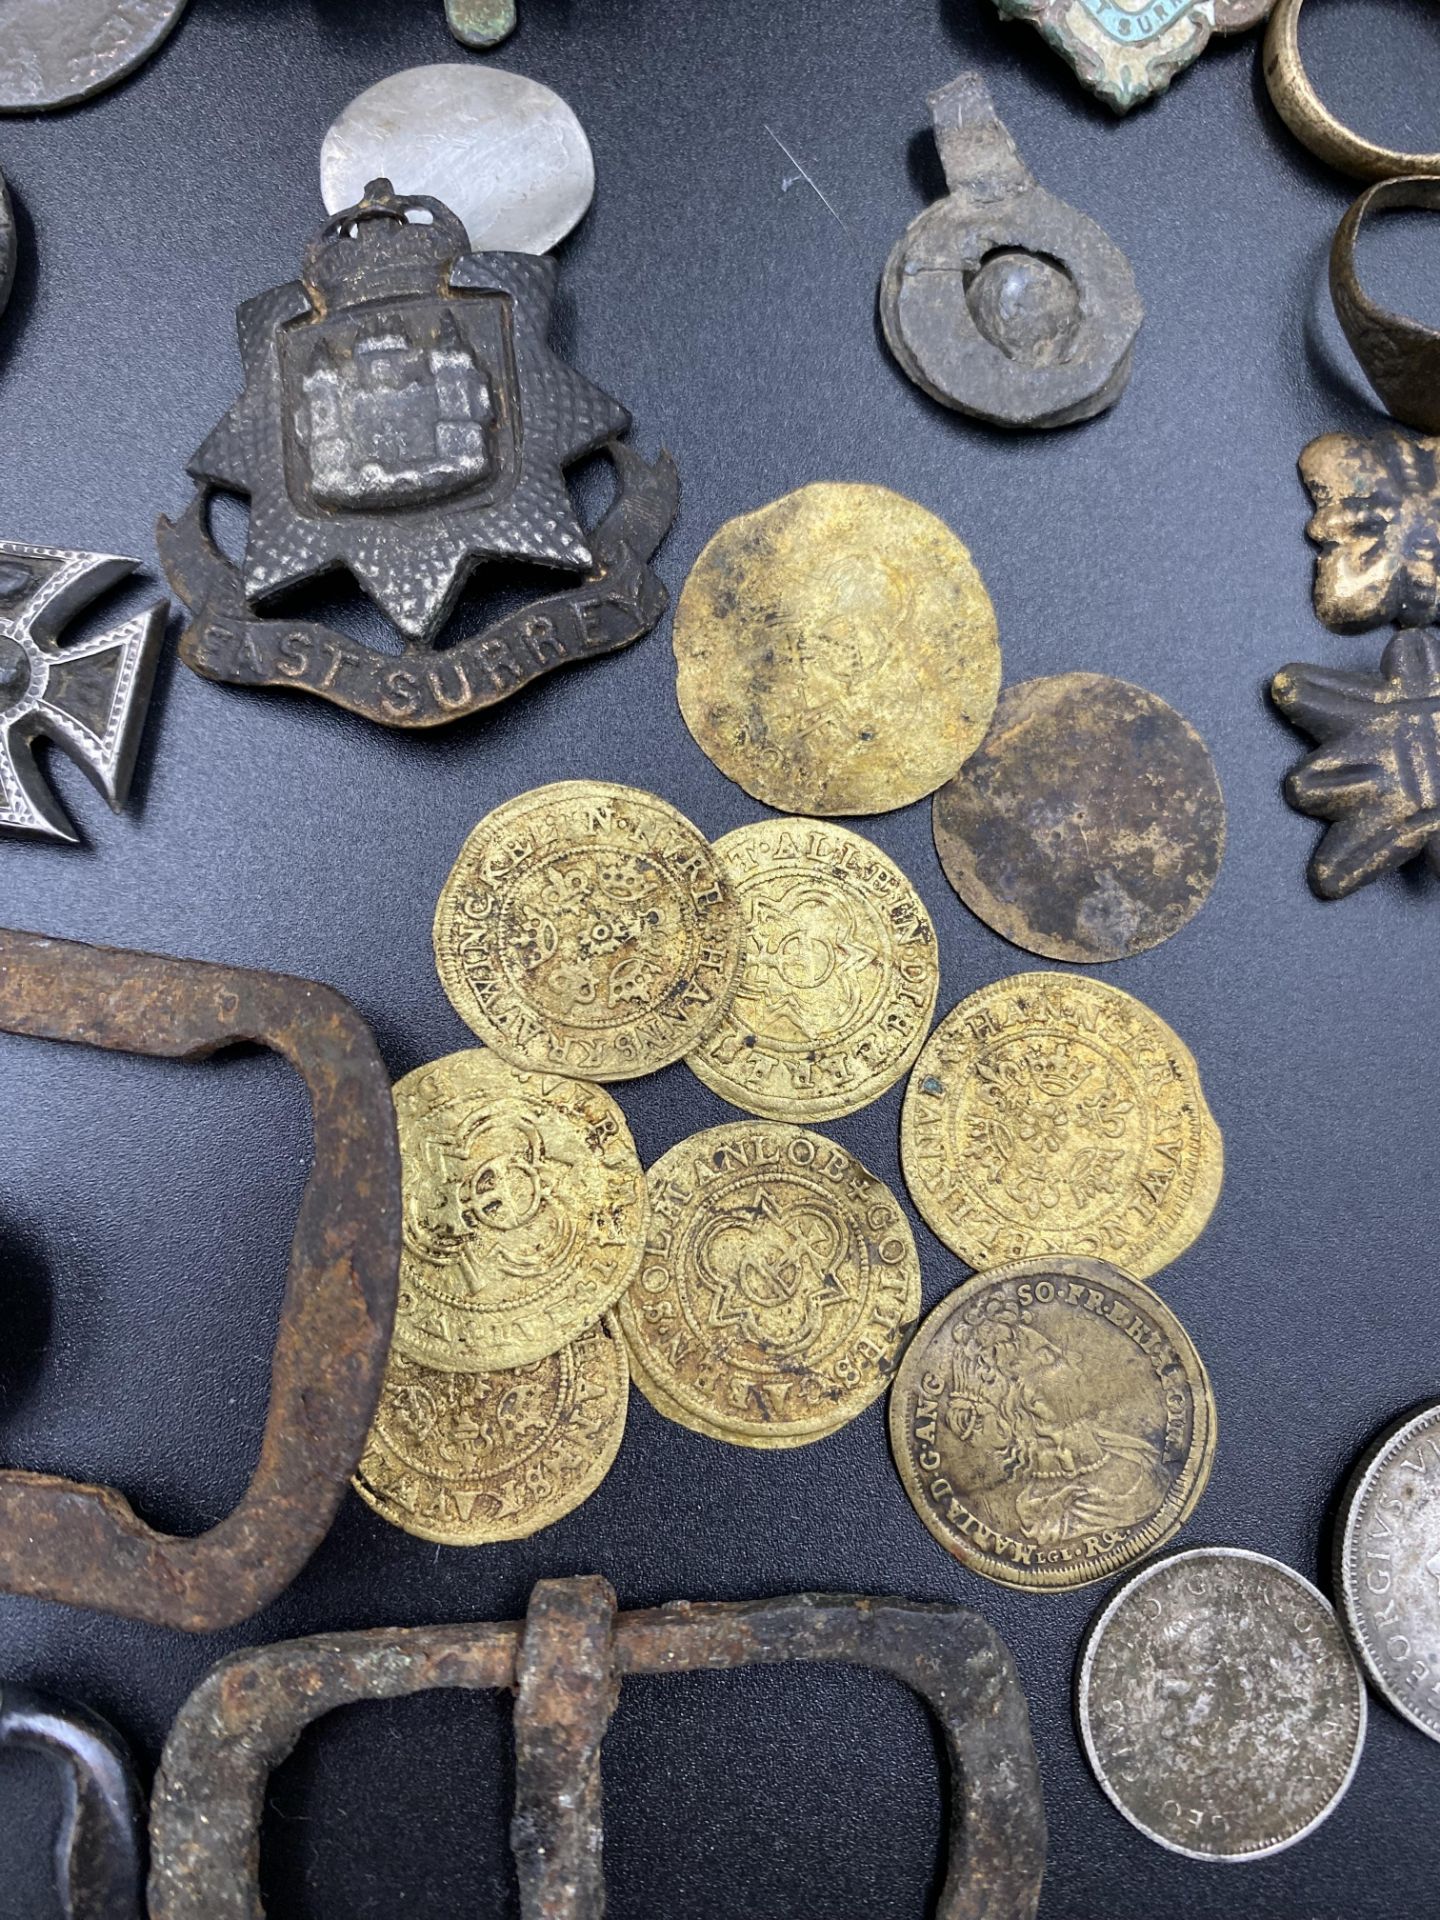 Collection of finds from the Thames Estuary, including coins, tags and buttons. - Image 8 of 8